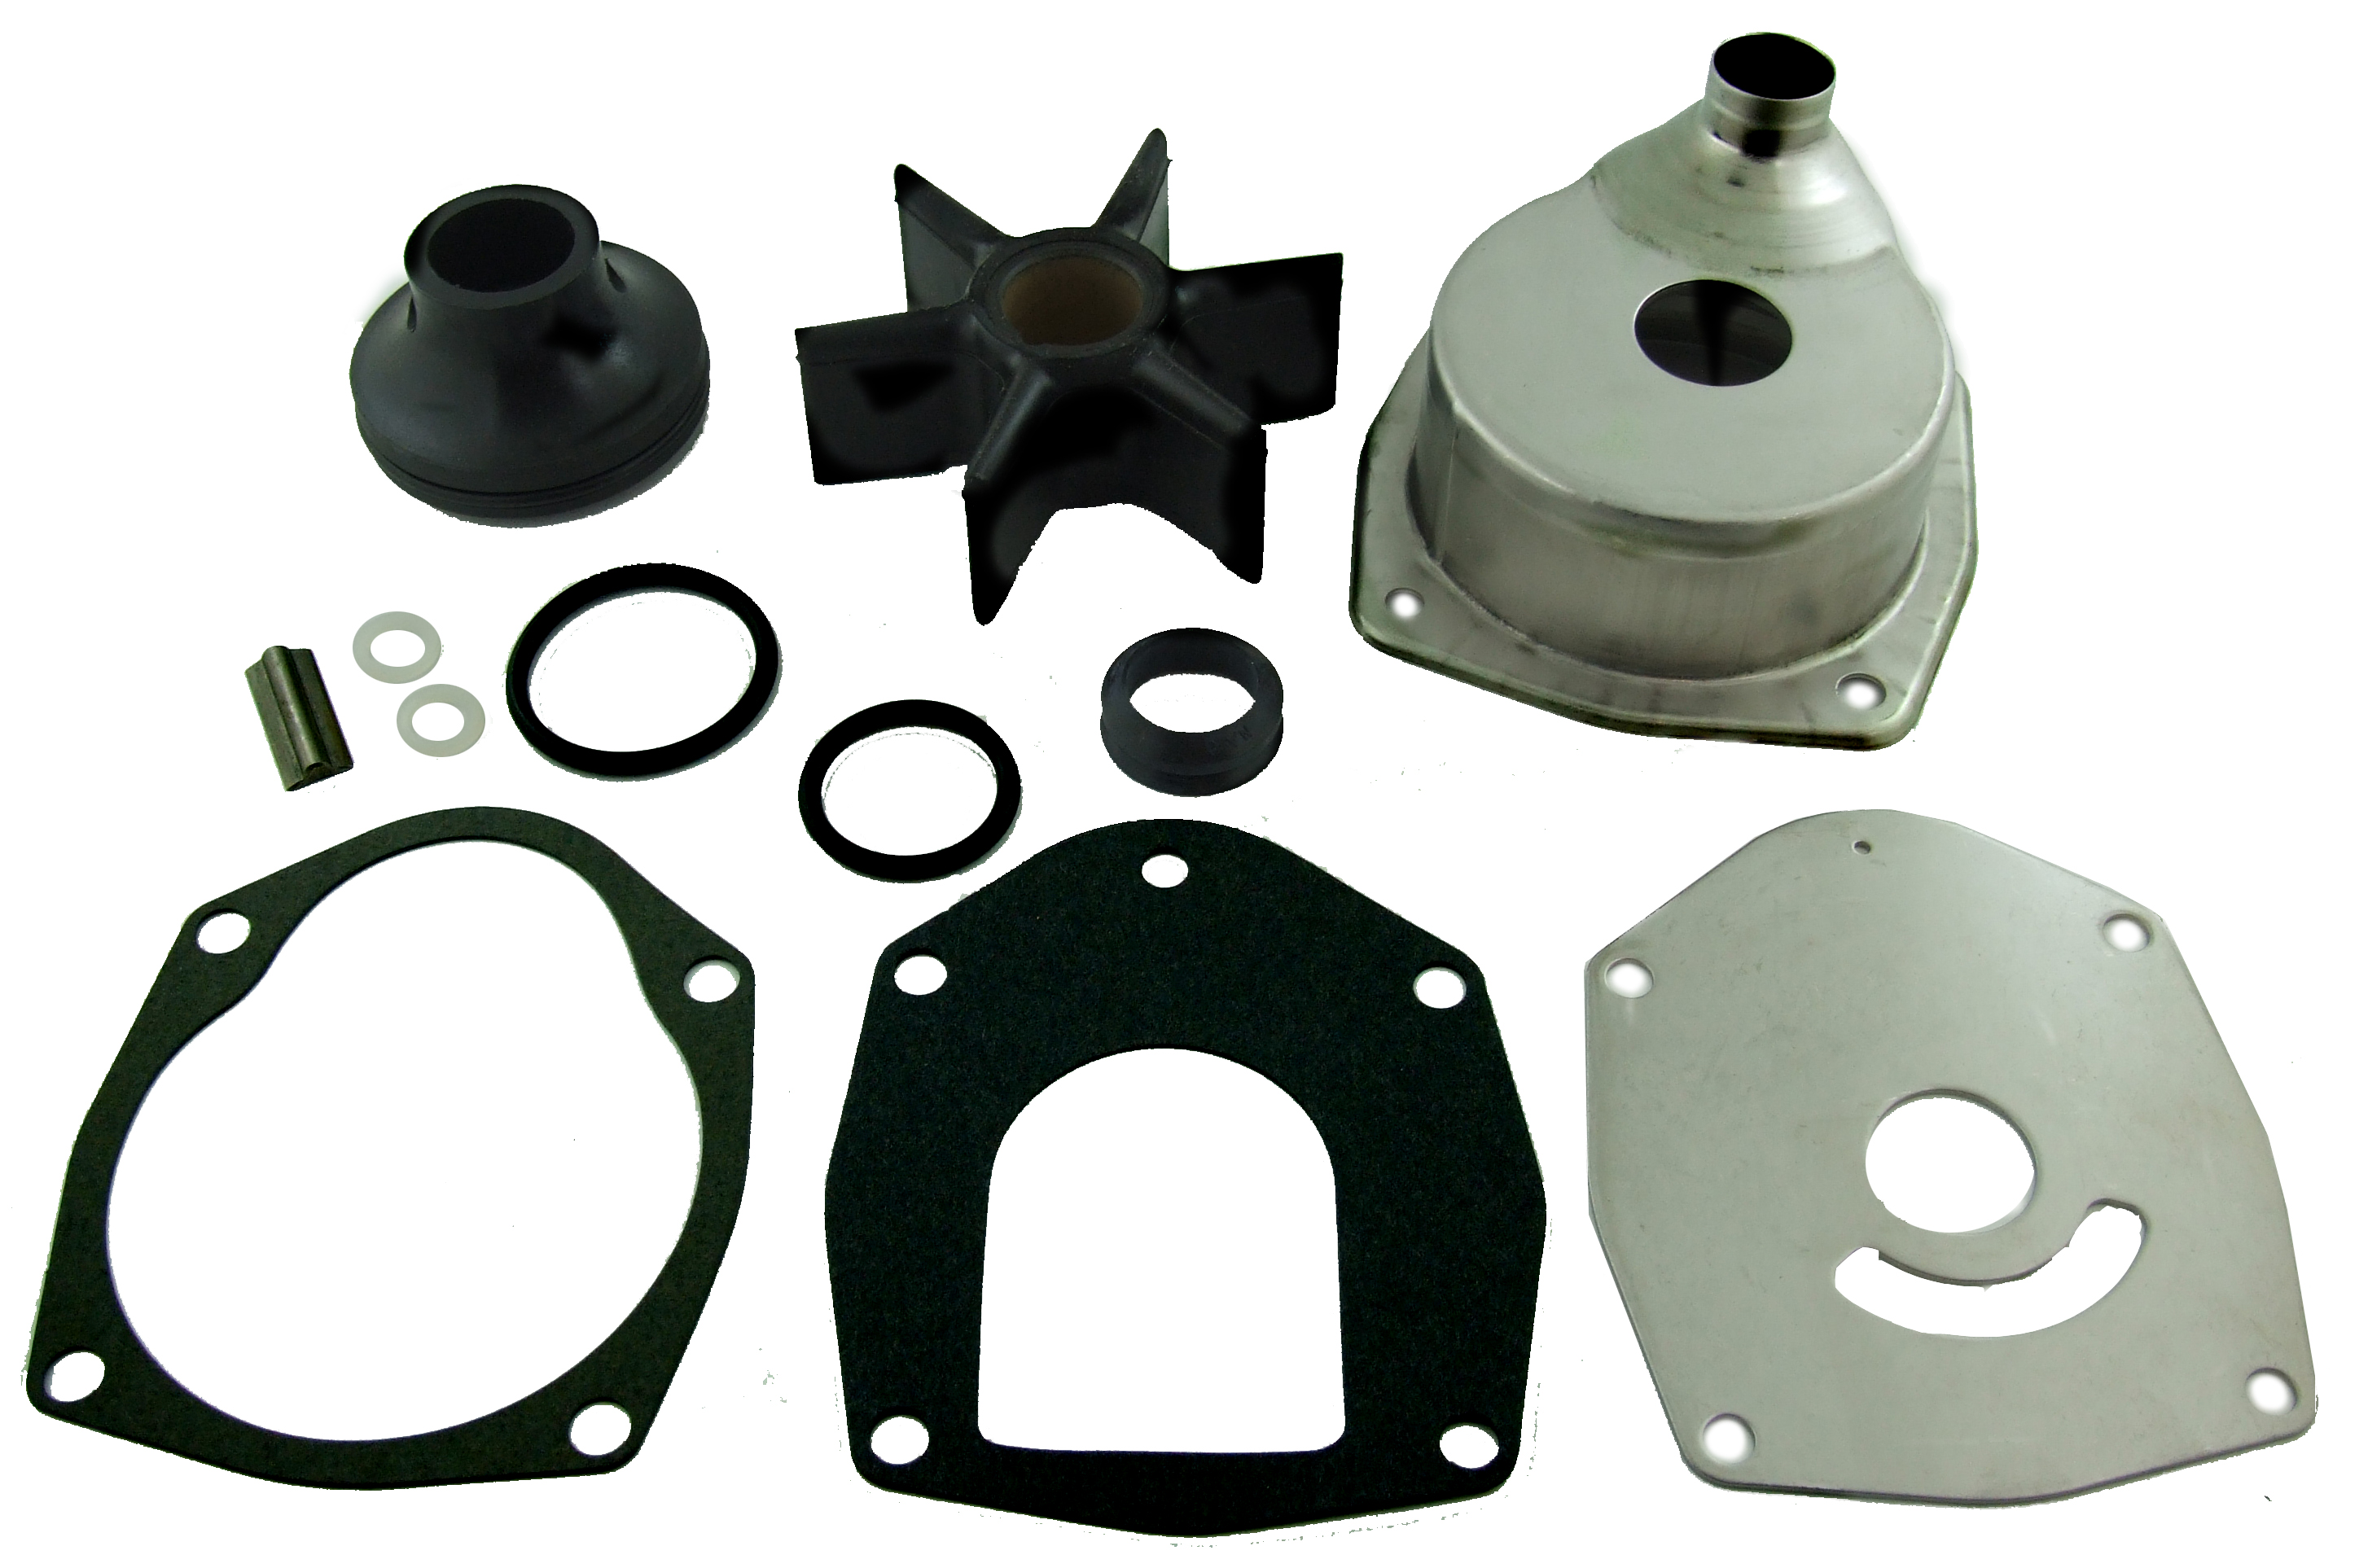 Water Pump Kit for Mercury Mariner 200-300 HP 3.0L EFI DFI with Housing 817275A5